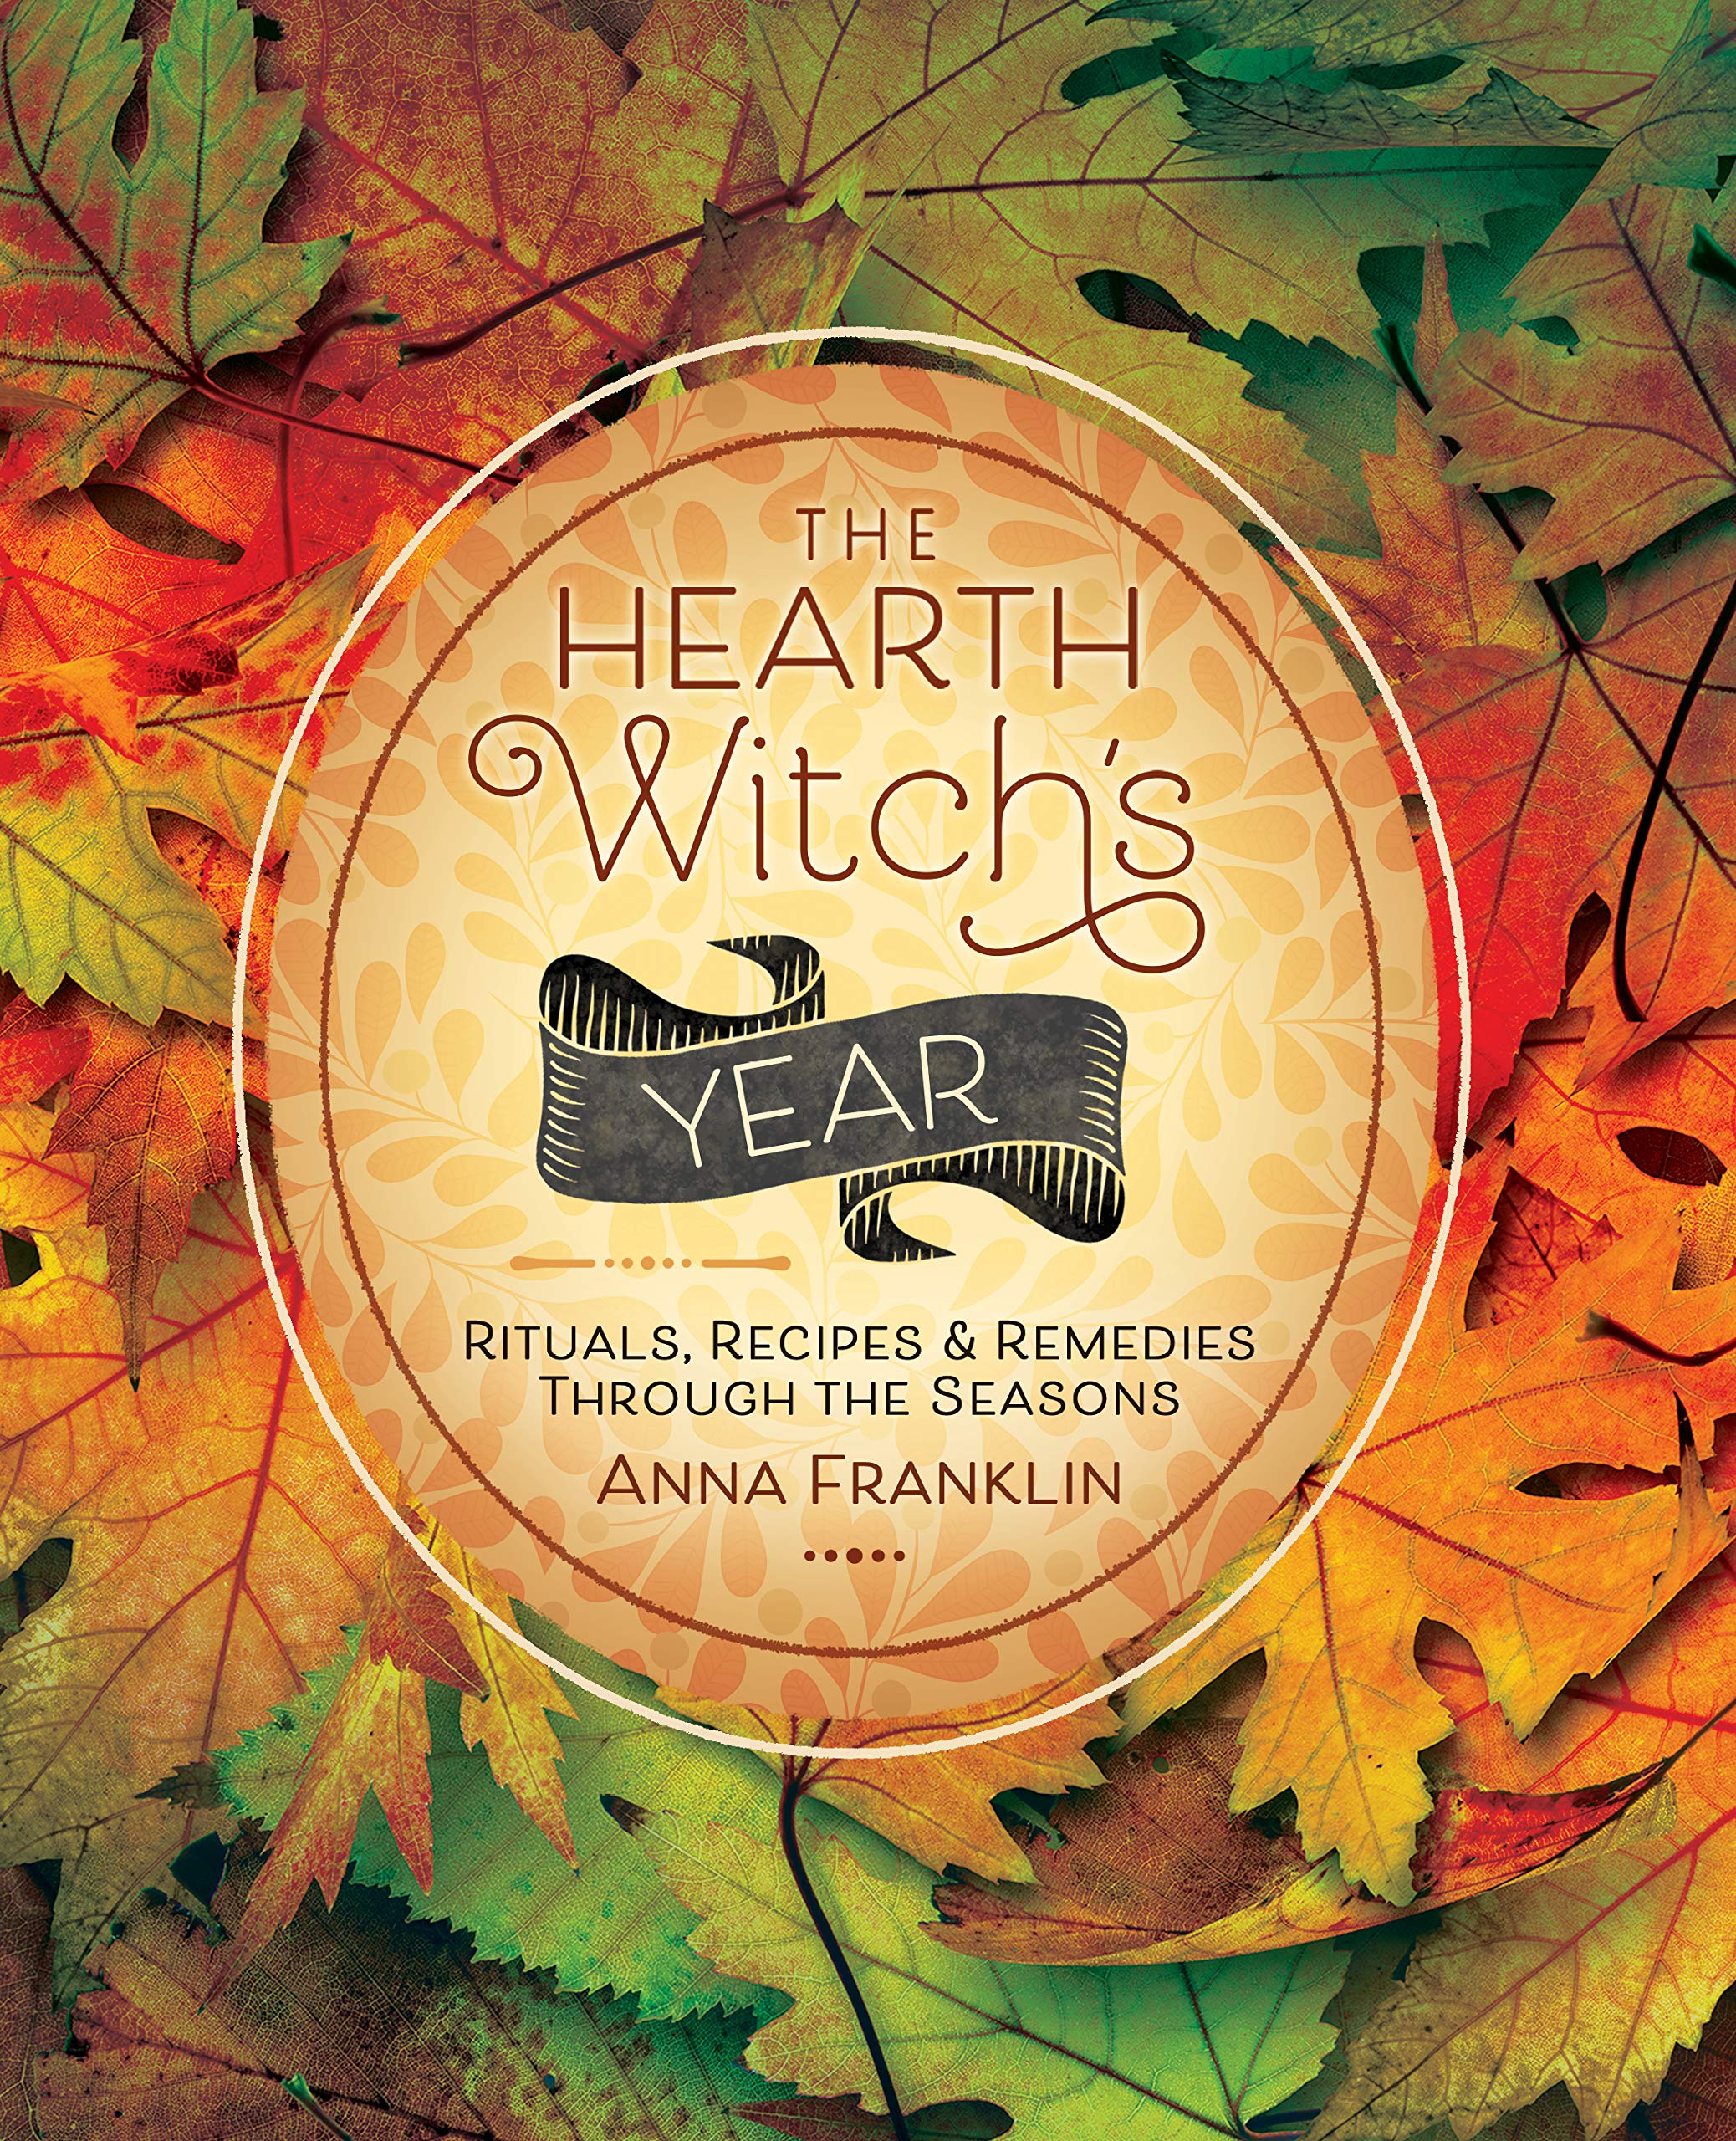 The Hearth Witch’s Year - Lighten Up Shop